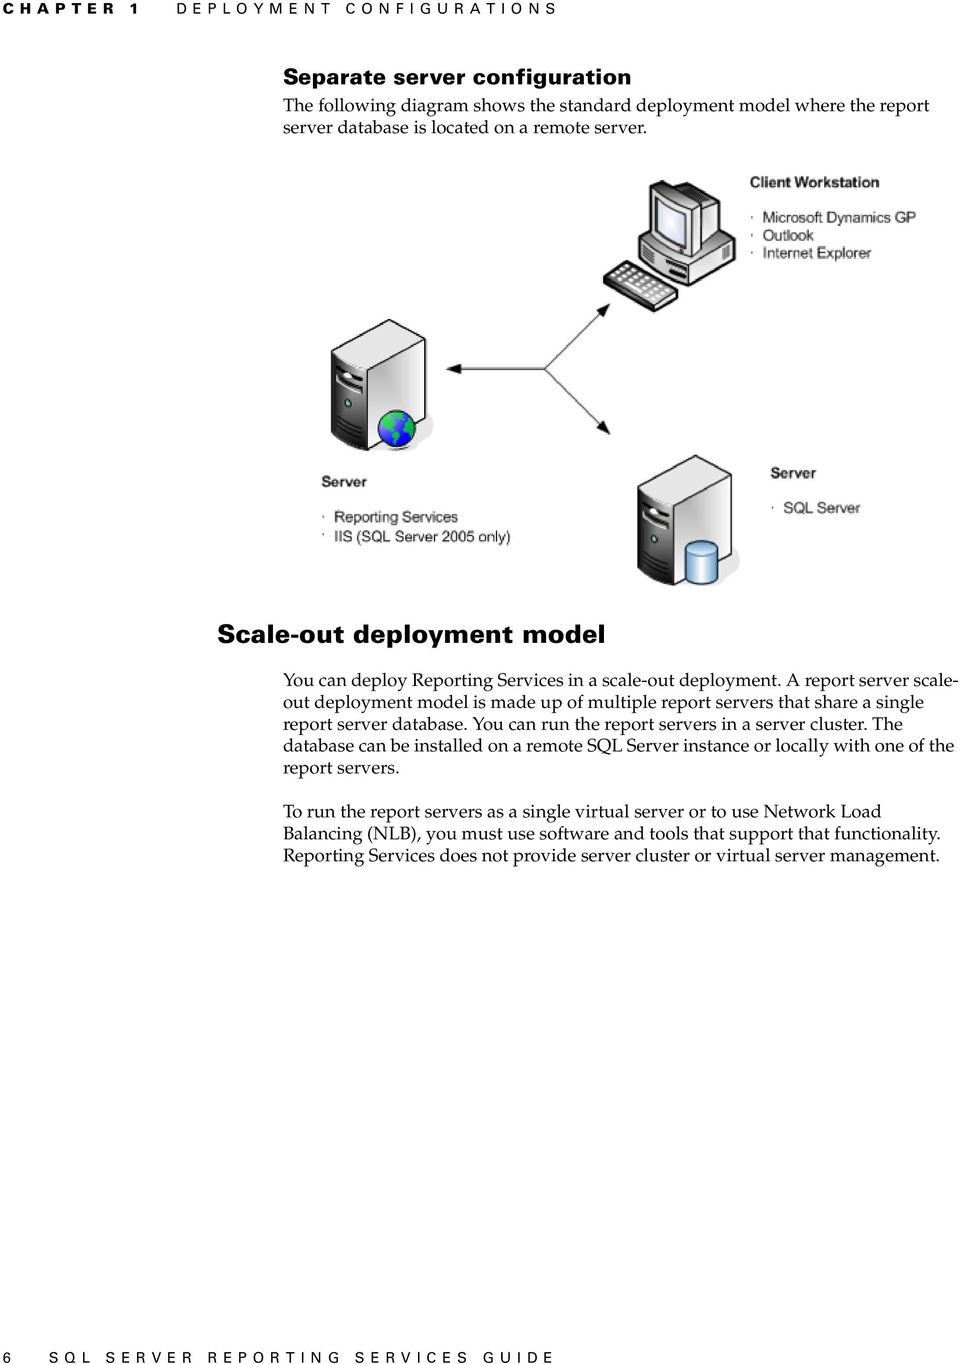 A report server scaleout deployment model is made up of multiple report servers that share a single report server database. You can run the report servers in a server cluster.